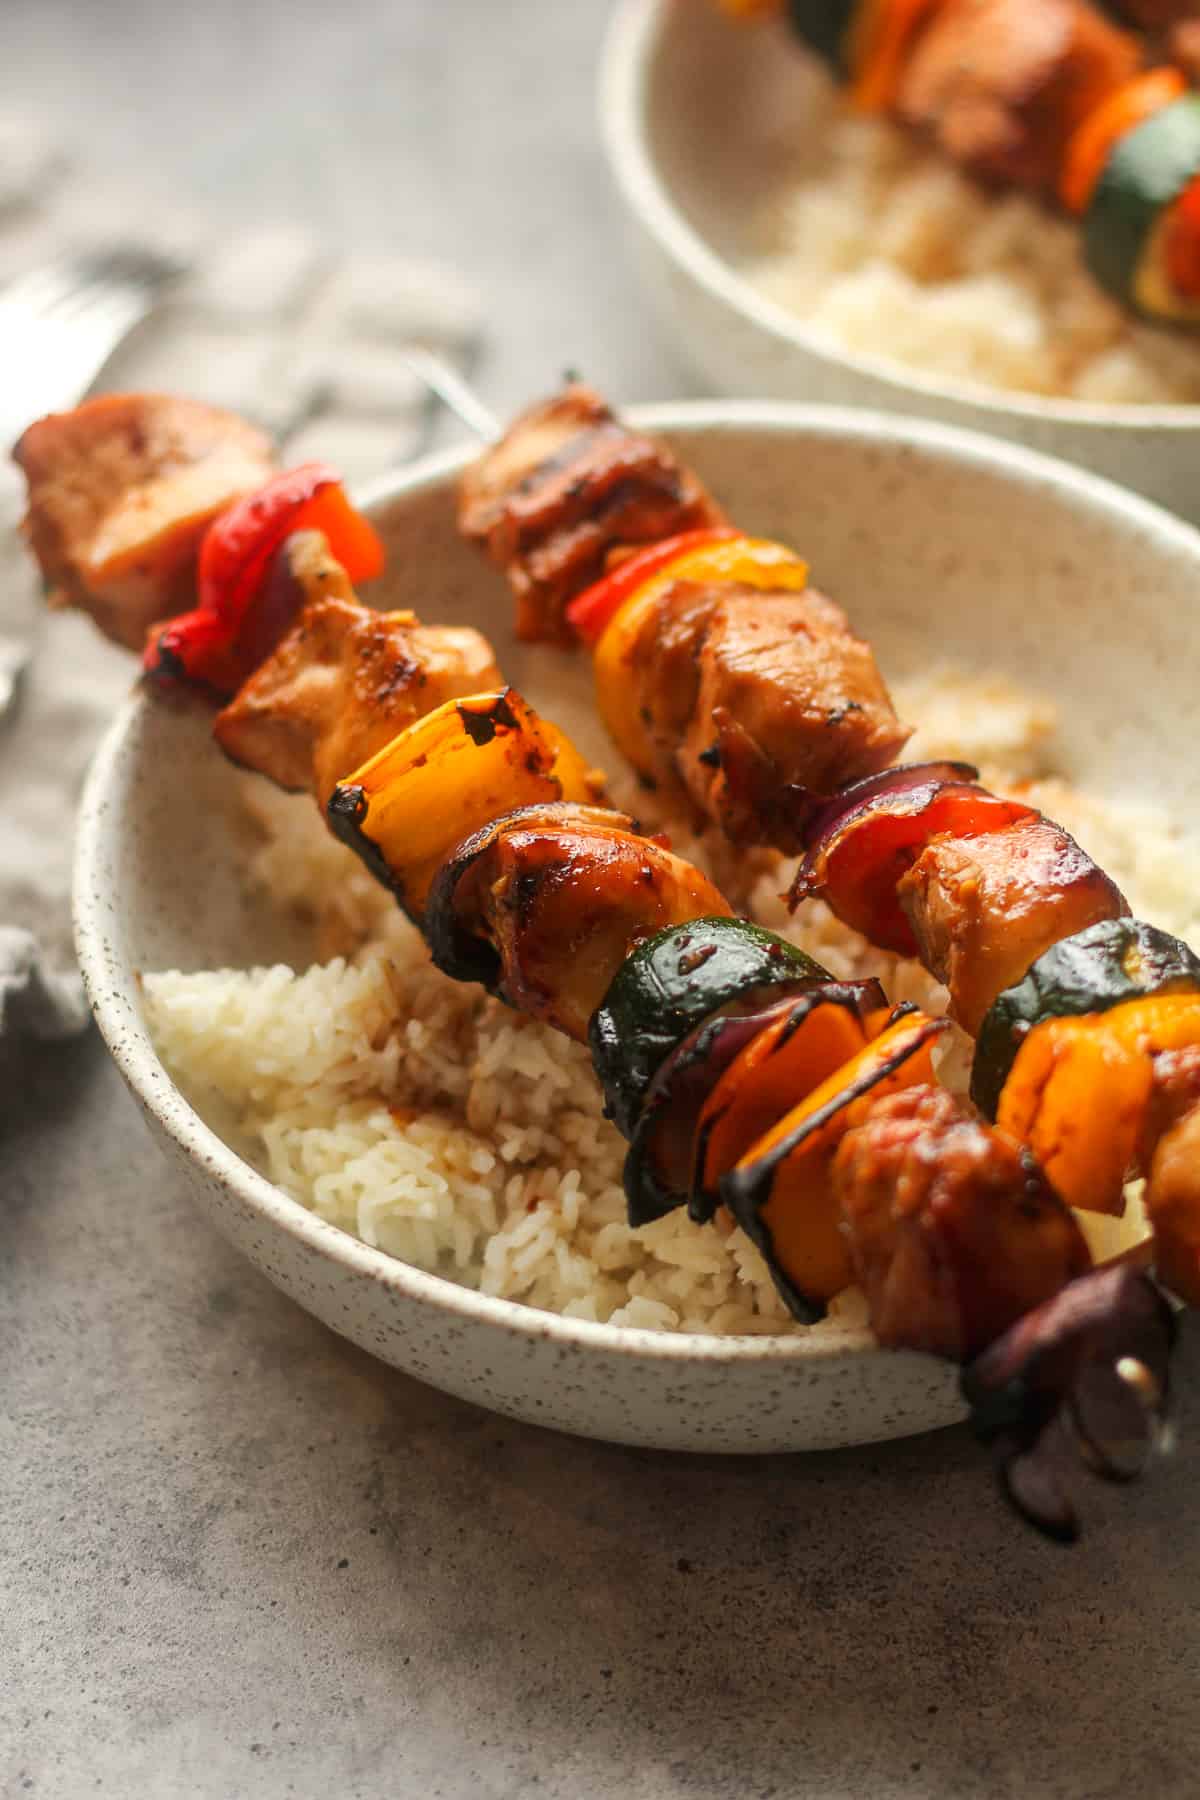 Side view of a bowl of rice with two chicken skewers on top.